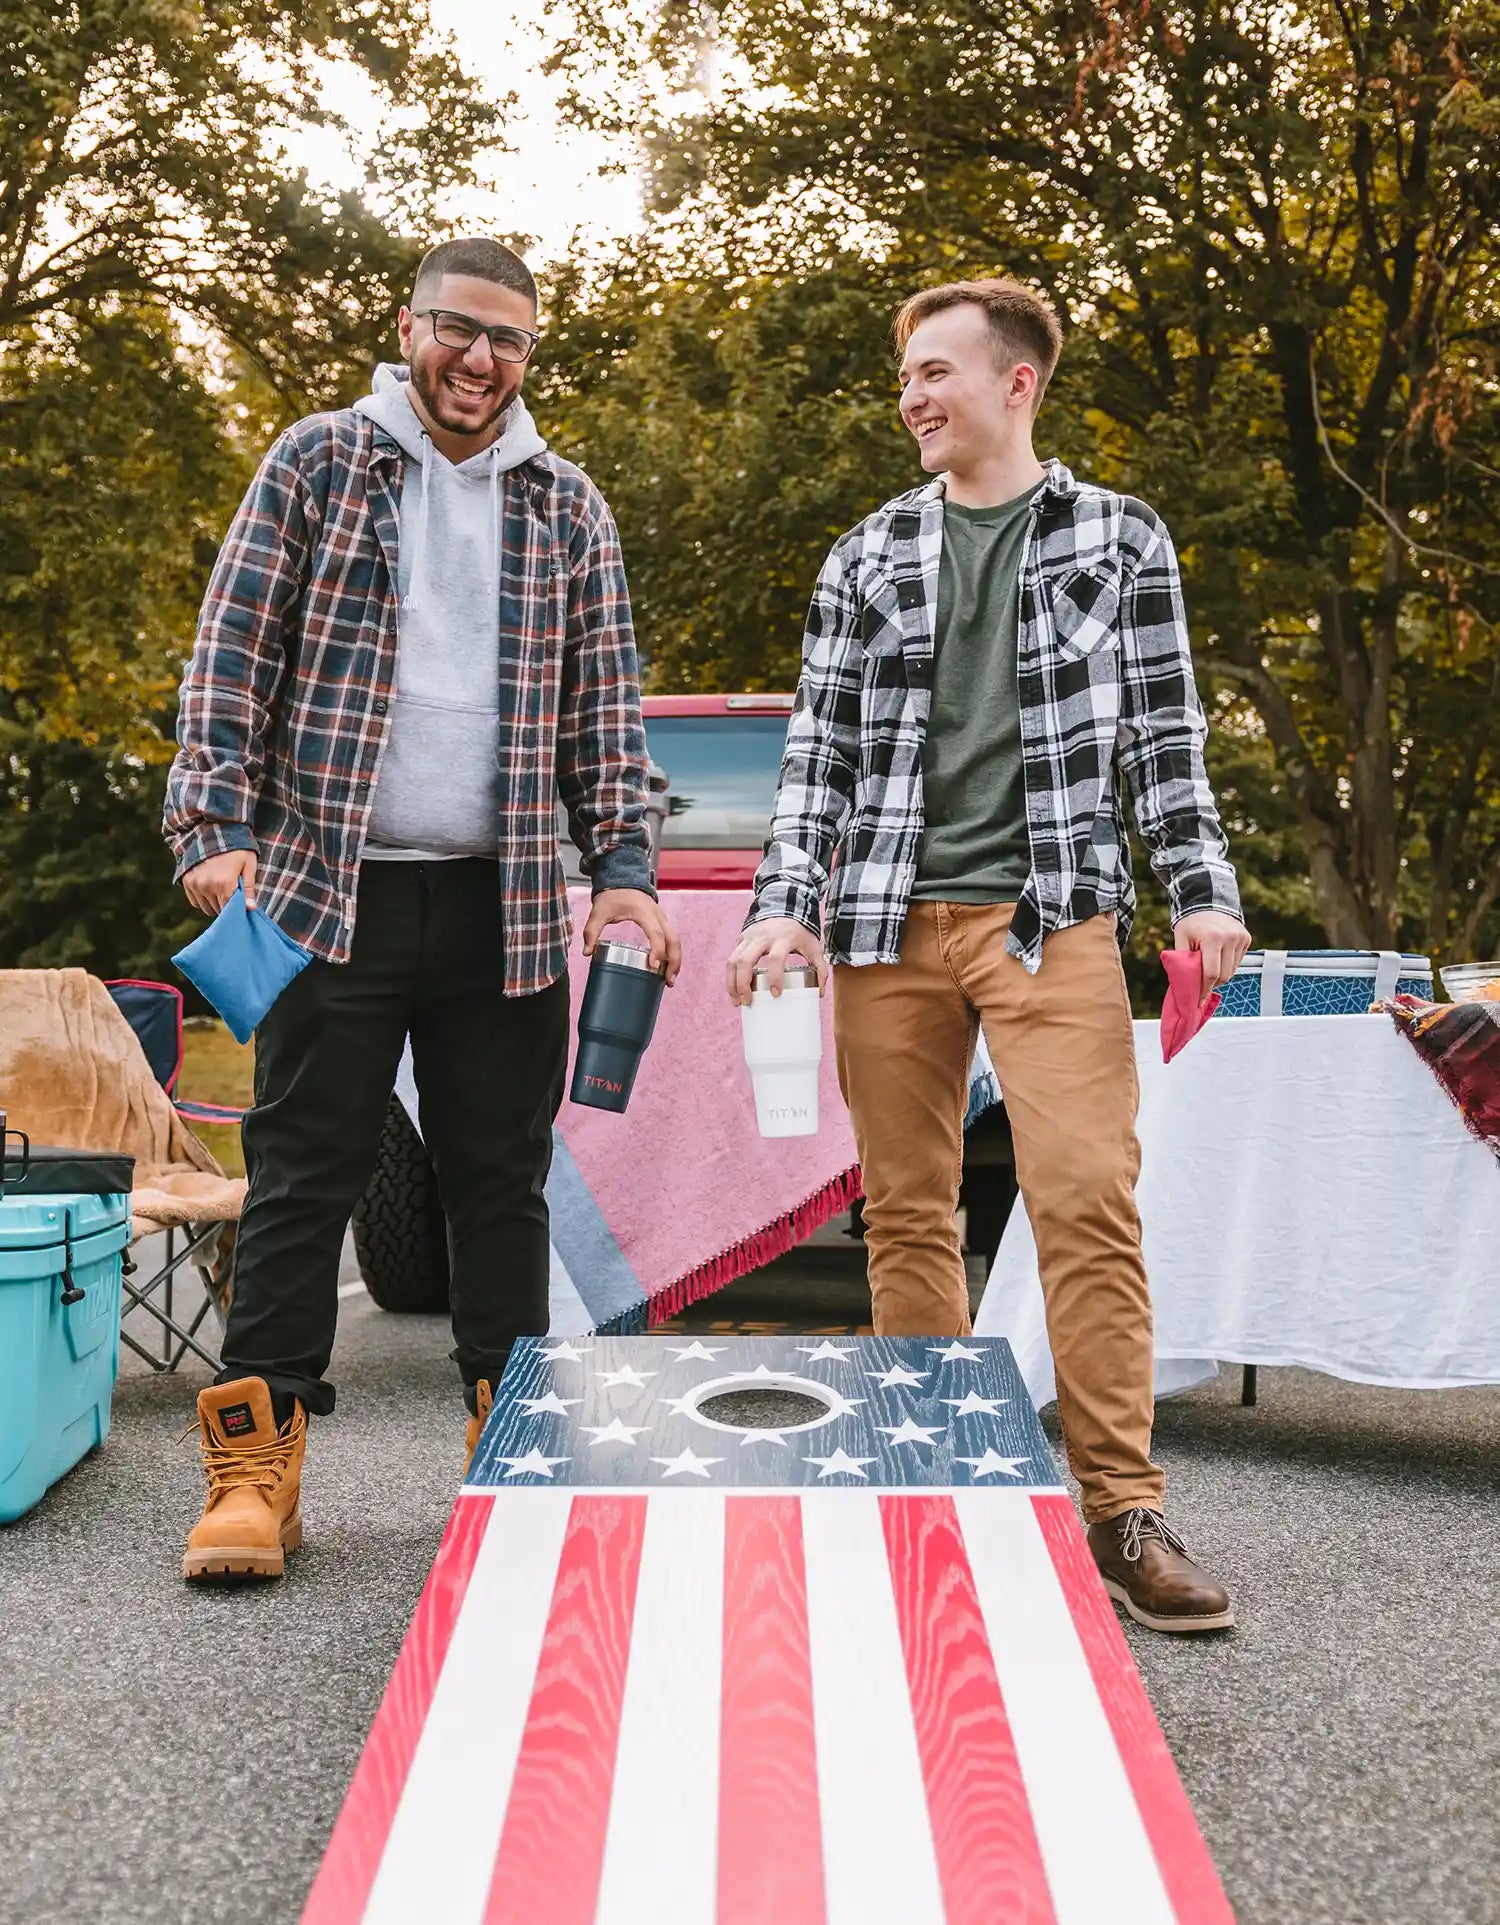 Two people play cornhole while celebrating Memorial Day